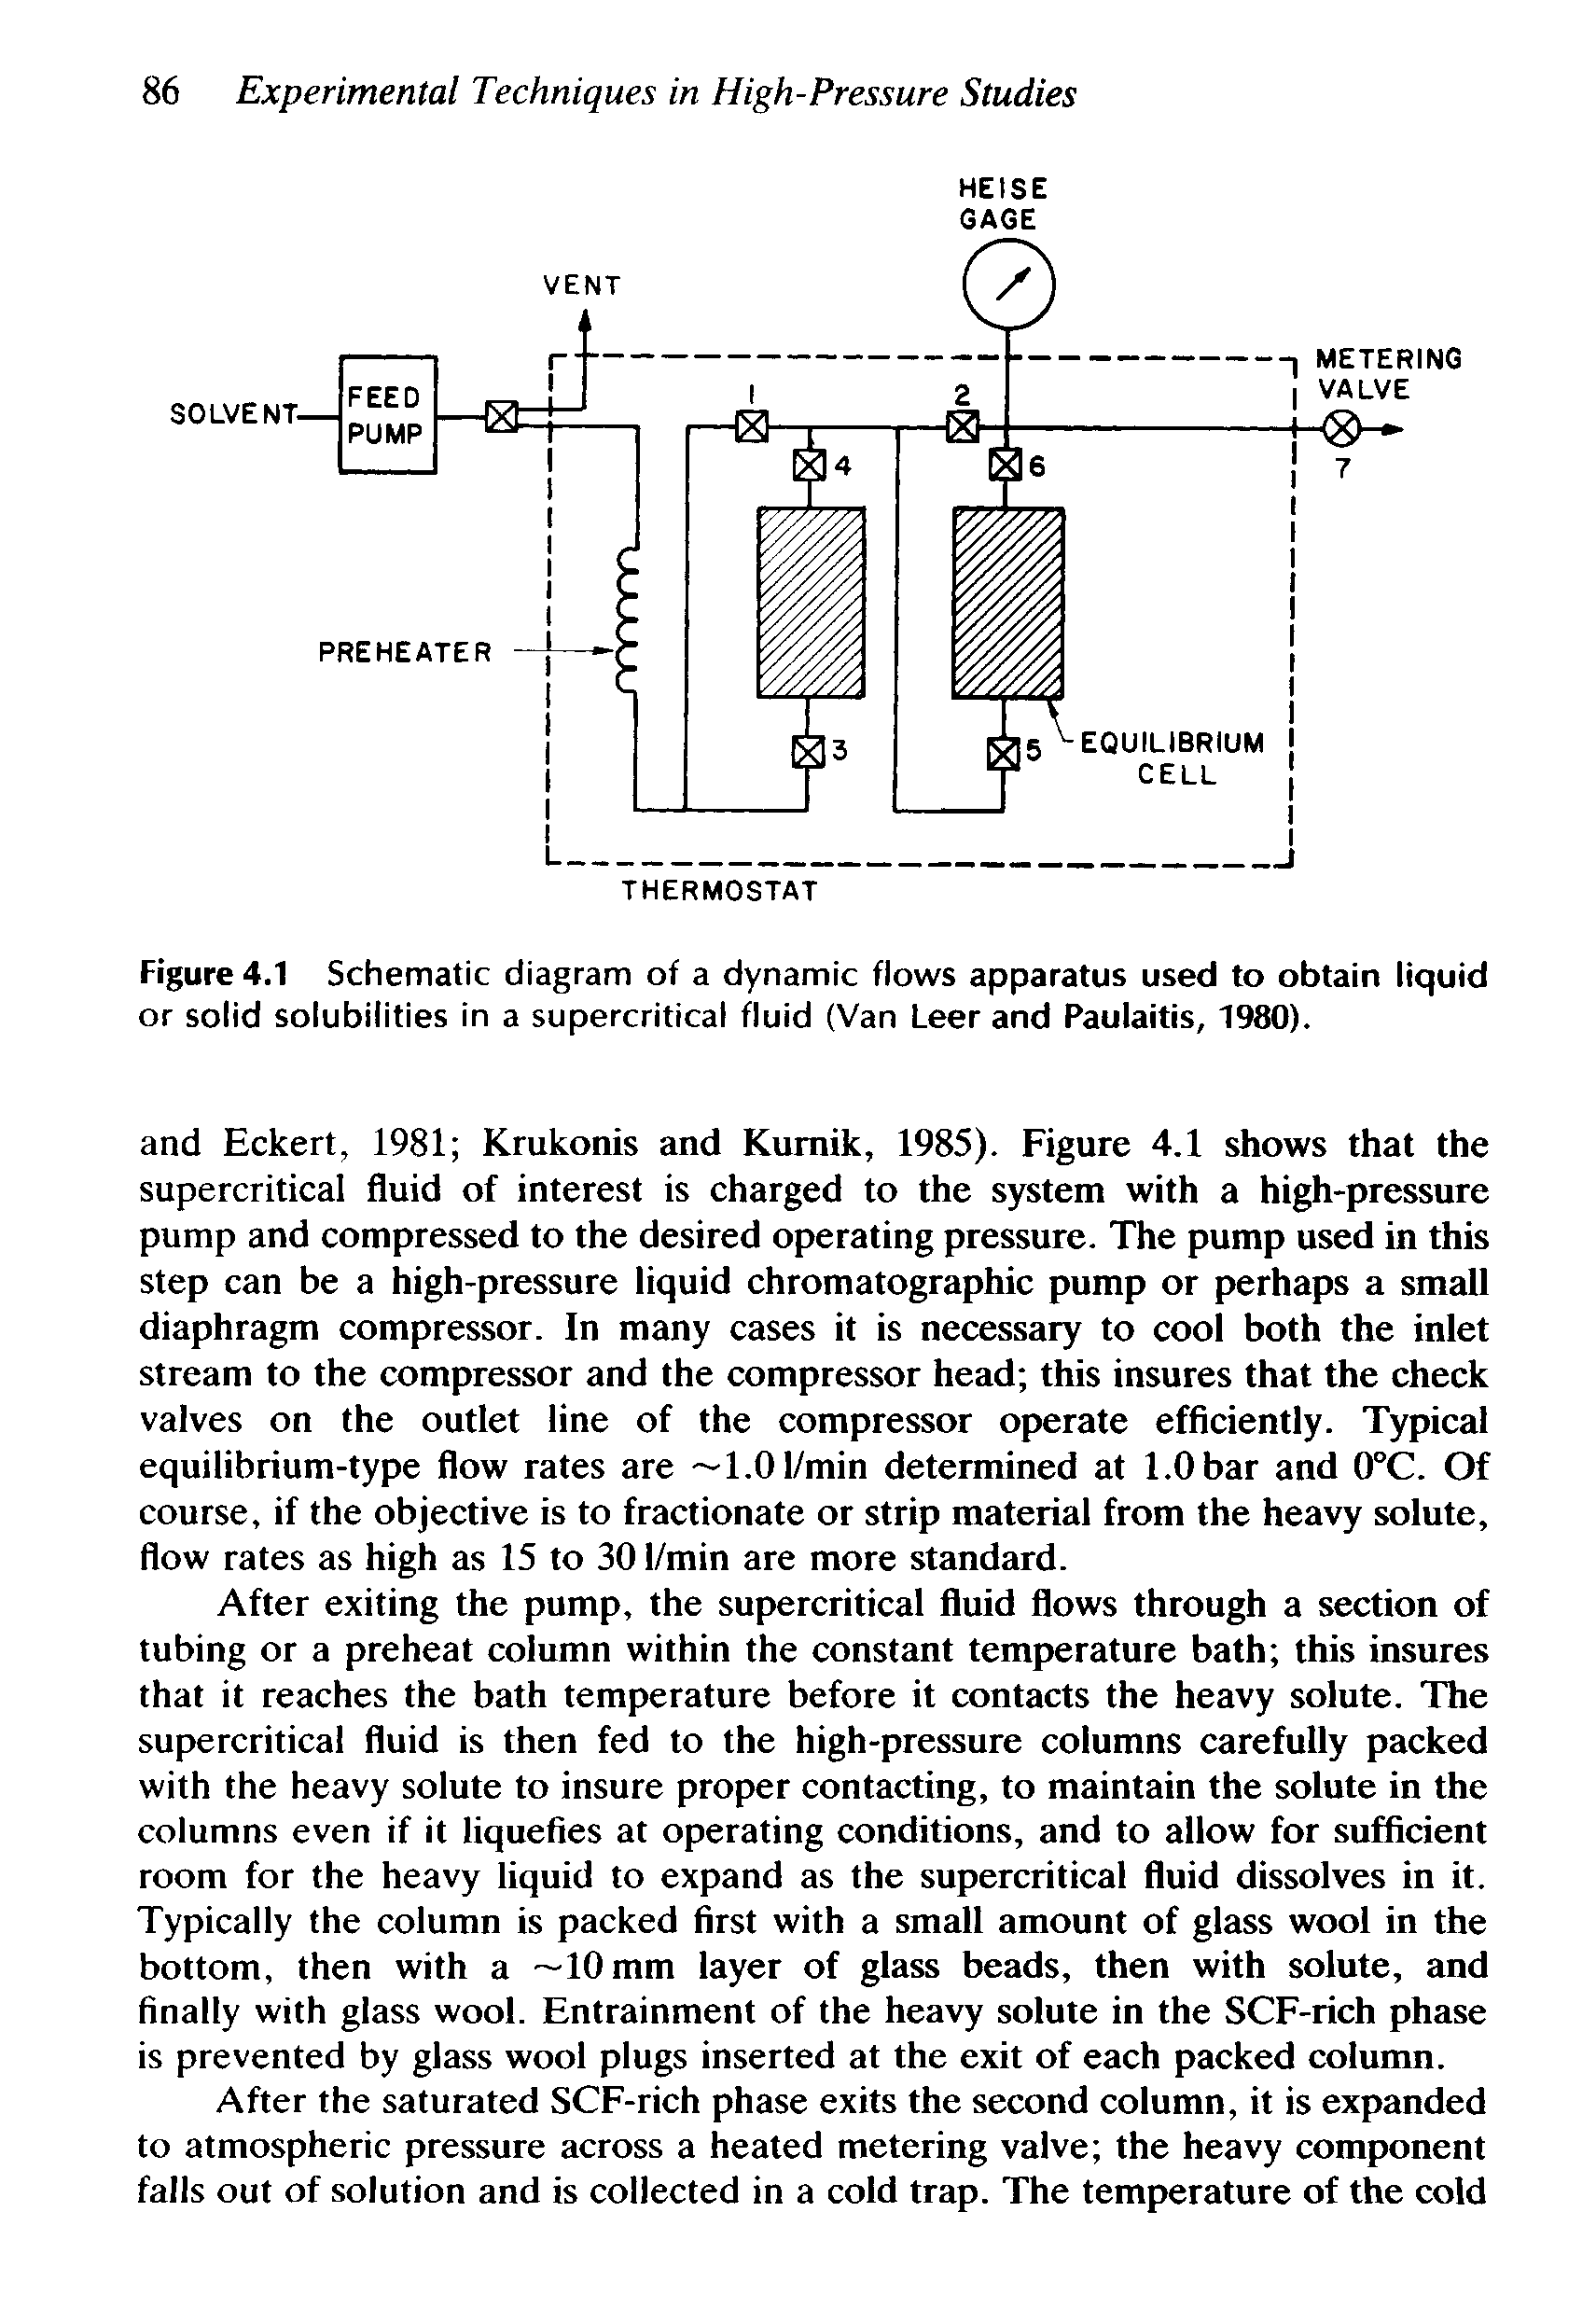 Figure 4.1 Schematic diagram of a dynamic flows apparatus used to obtain liquid or solid solubilities in a supercritical fluid (Van Leer and Paulaitis, 1980).